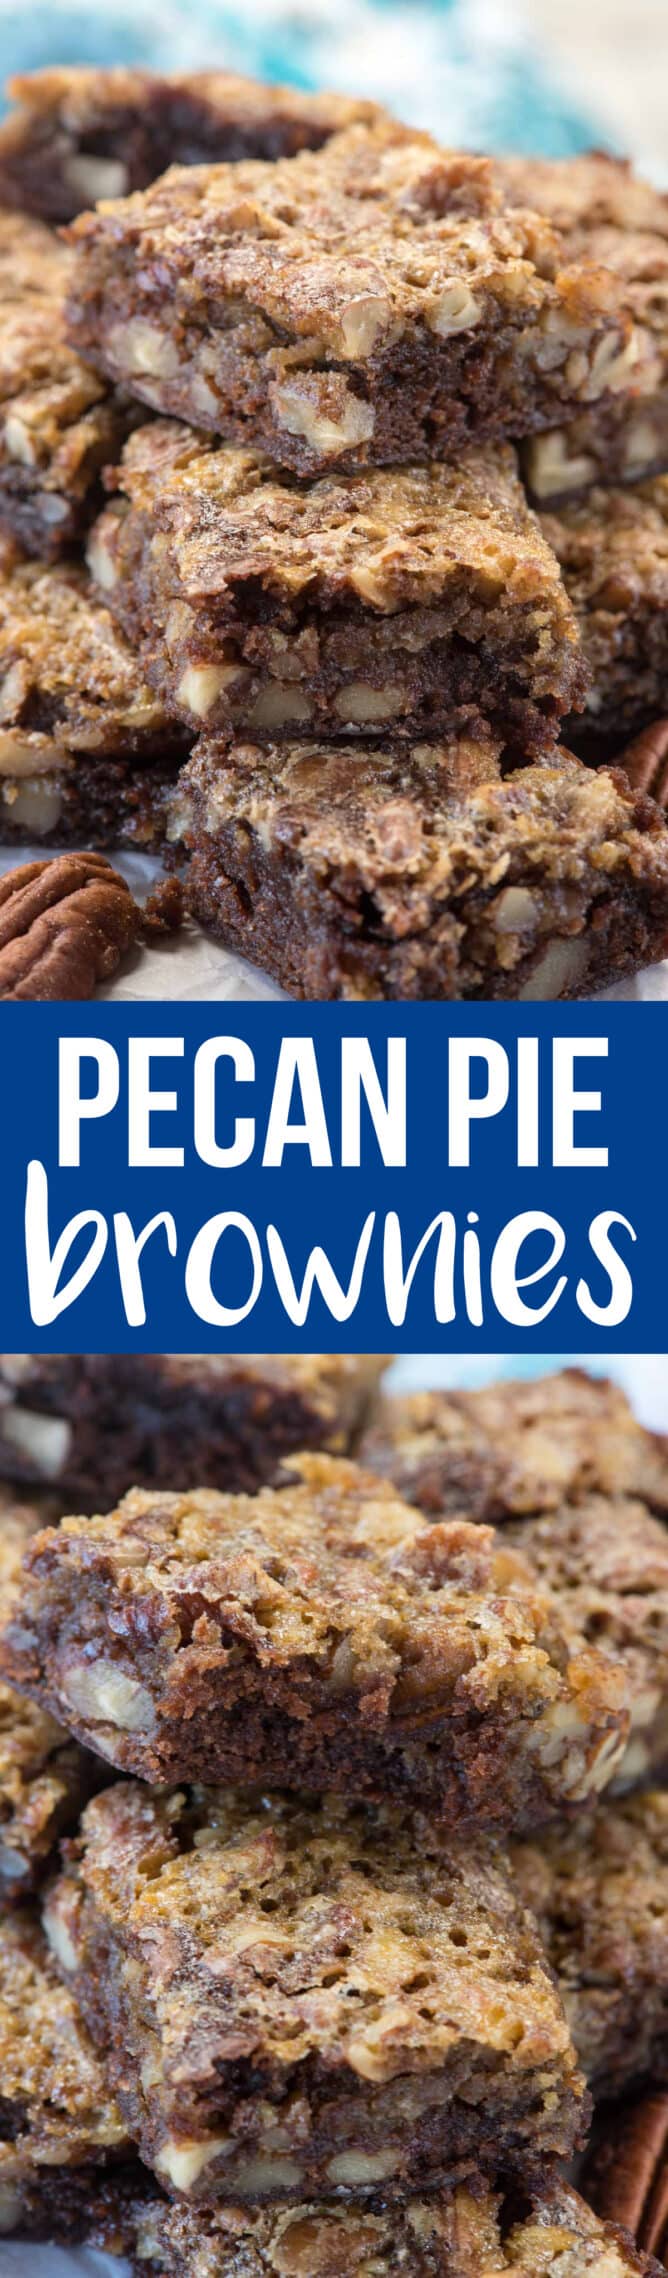 Pecan Pie Brownies are an easy way to have your pecan pie and your brownies too! These are great for a party or just because you love gooey chocolate brownies and the perfect pecan pie!